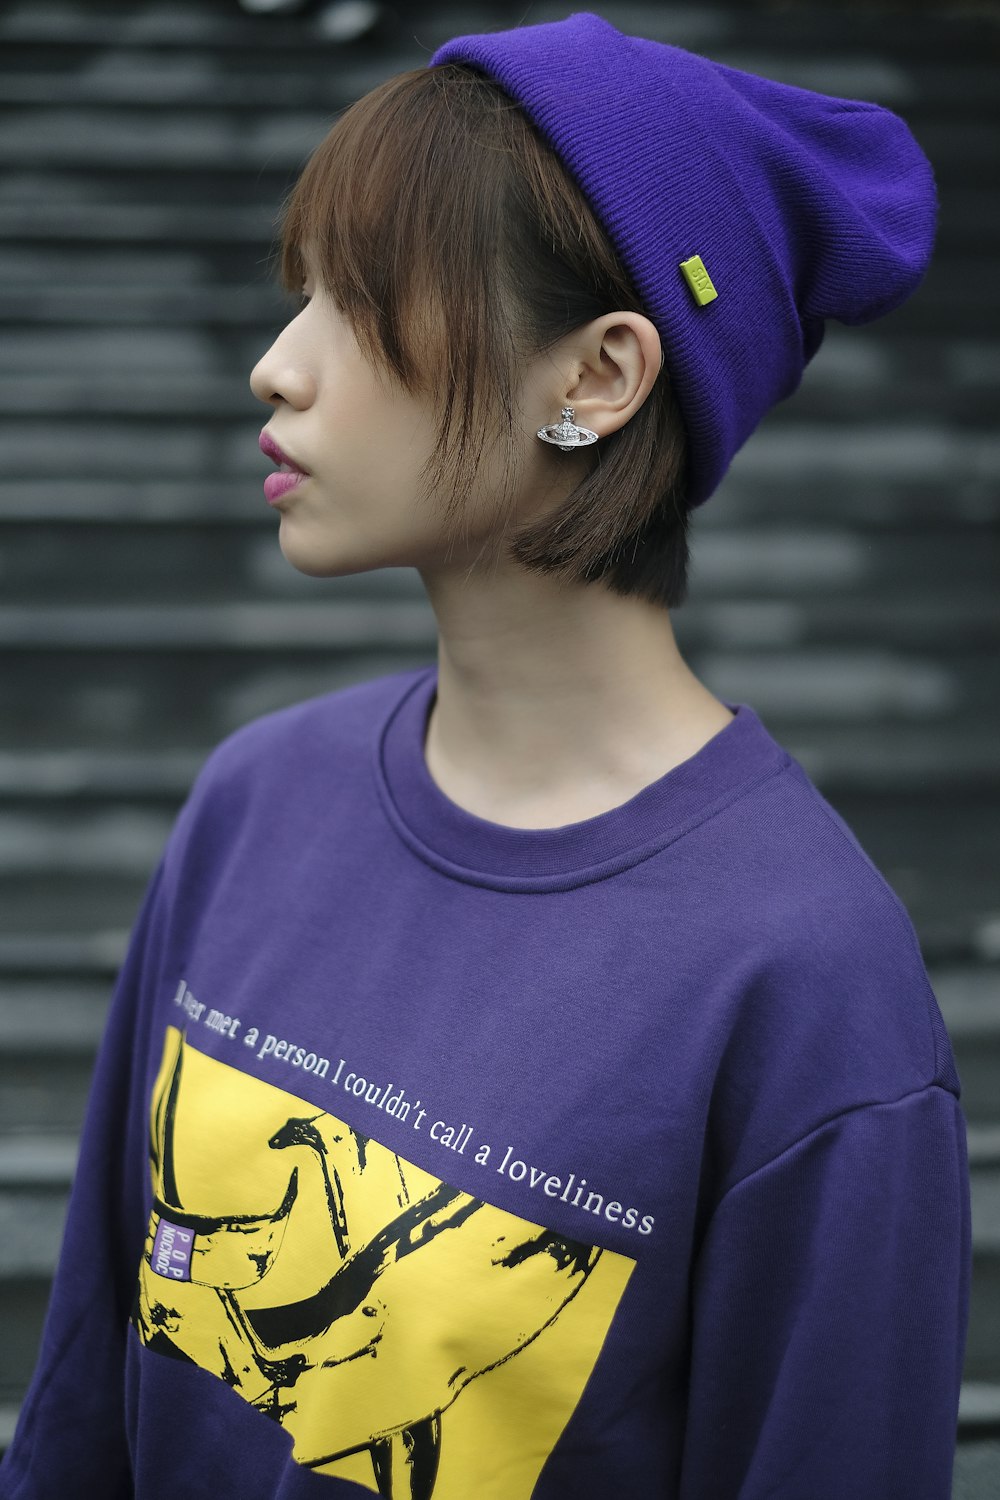 a person wearing a purple hat and a purple shirt